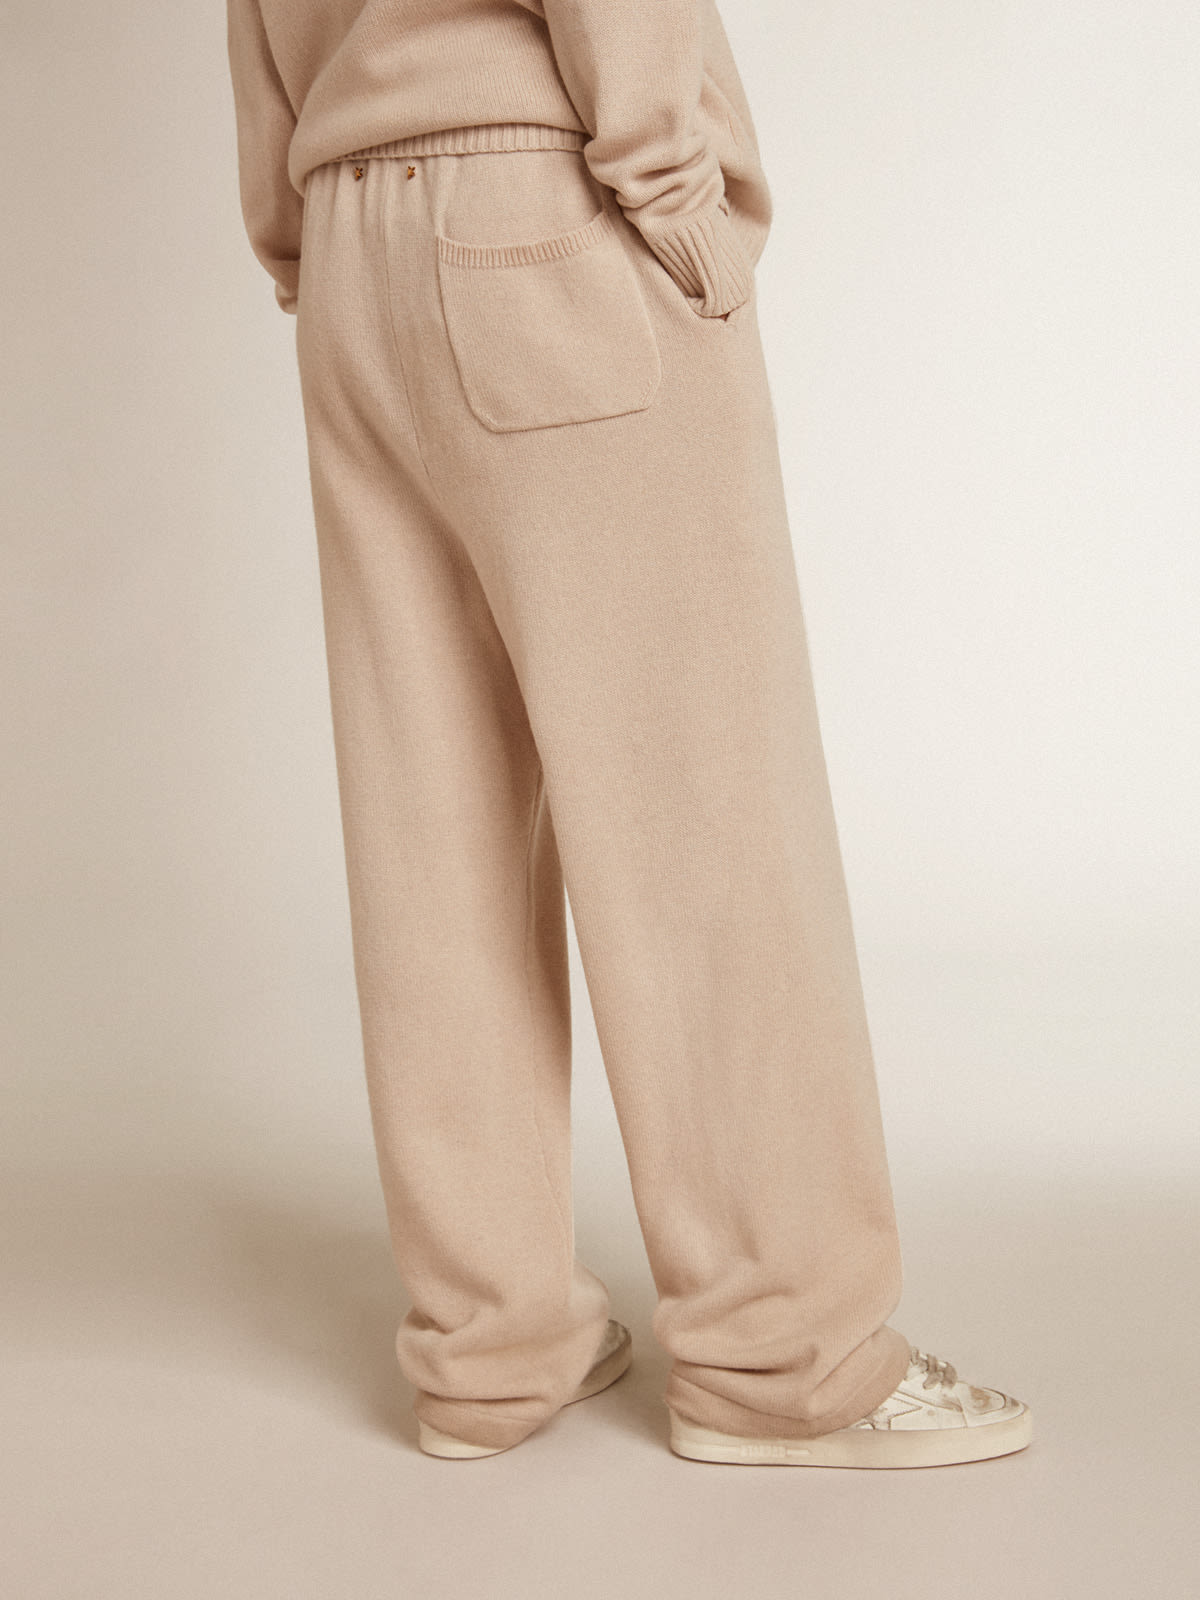 Golden Goose - Natural white cashmere blend women’s joggers in 